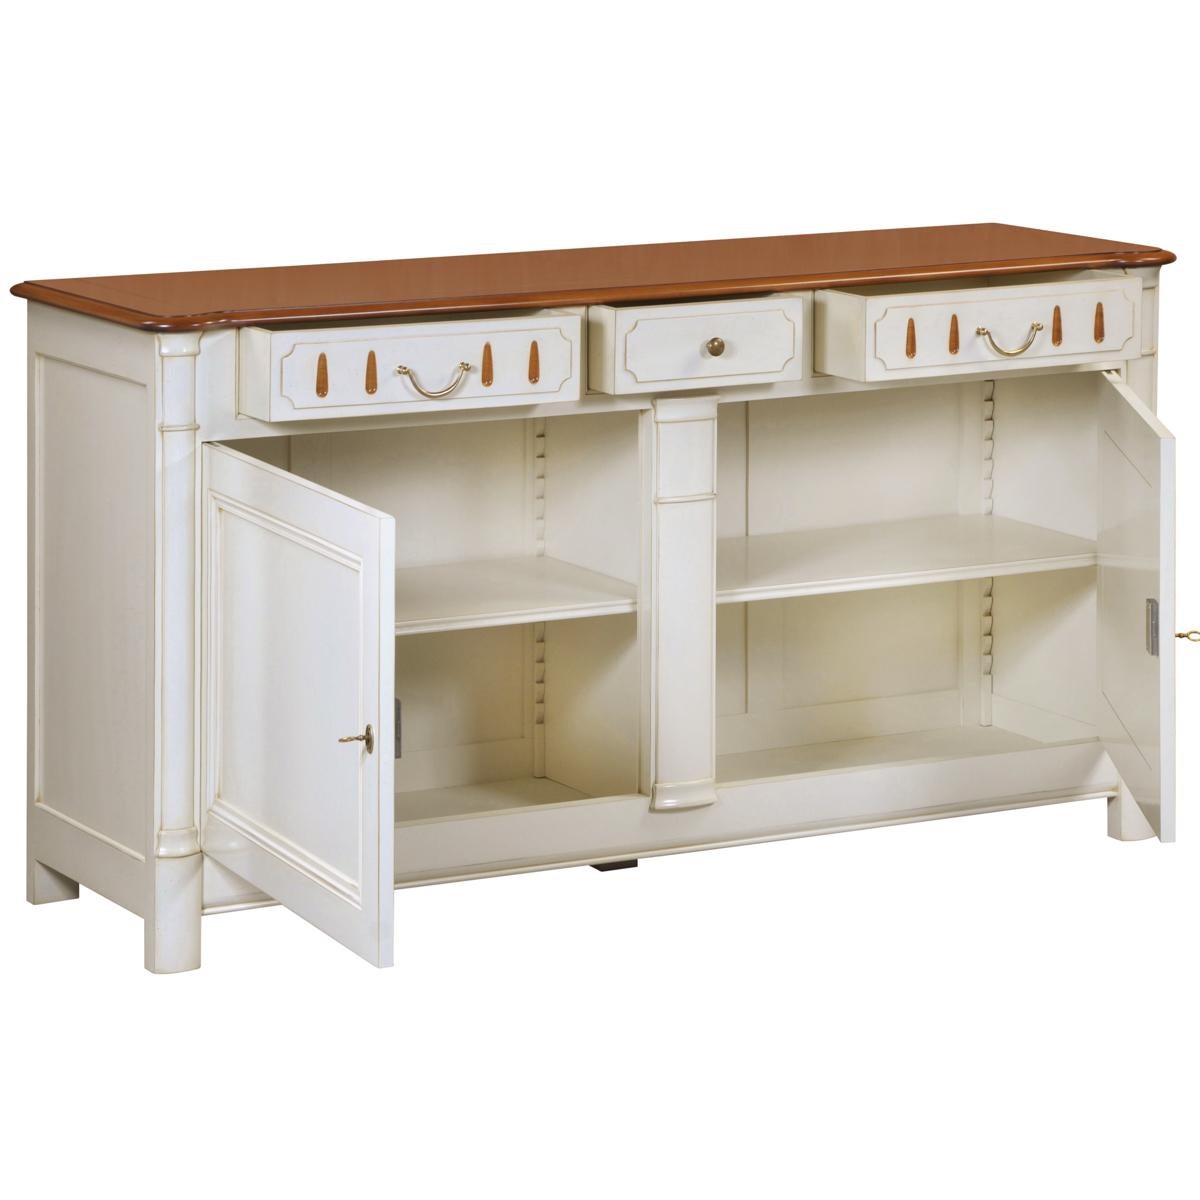 French Provincial French Tradition 2-Door Buffet in Cherry, 3 Drawers and White-Cream Lacquered For Sale